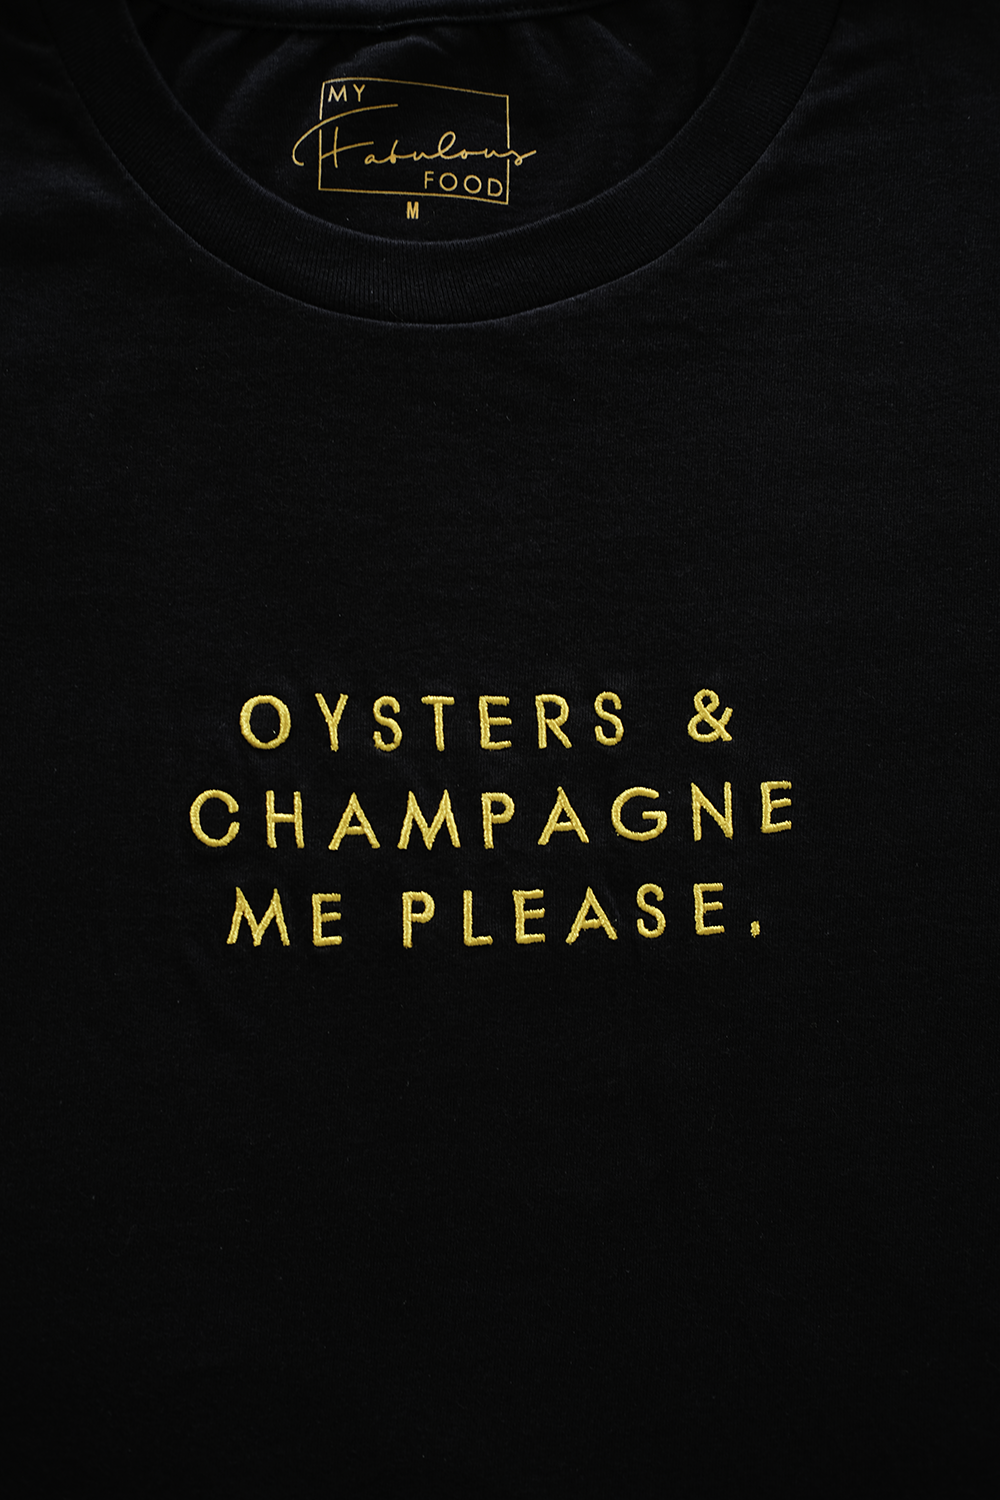 Oysters & Champagne Shirt